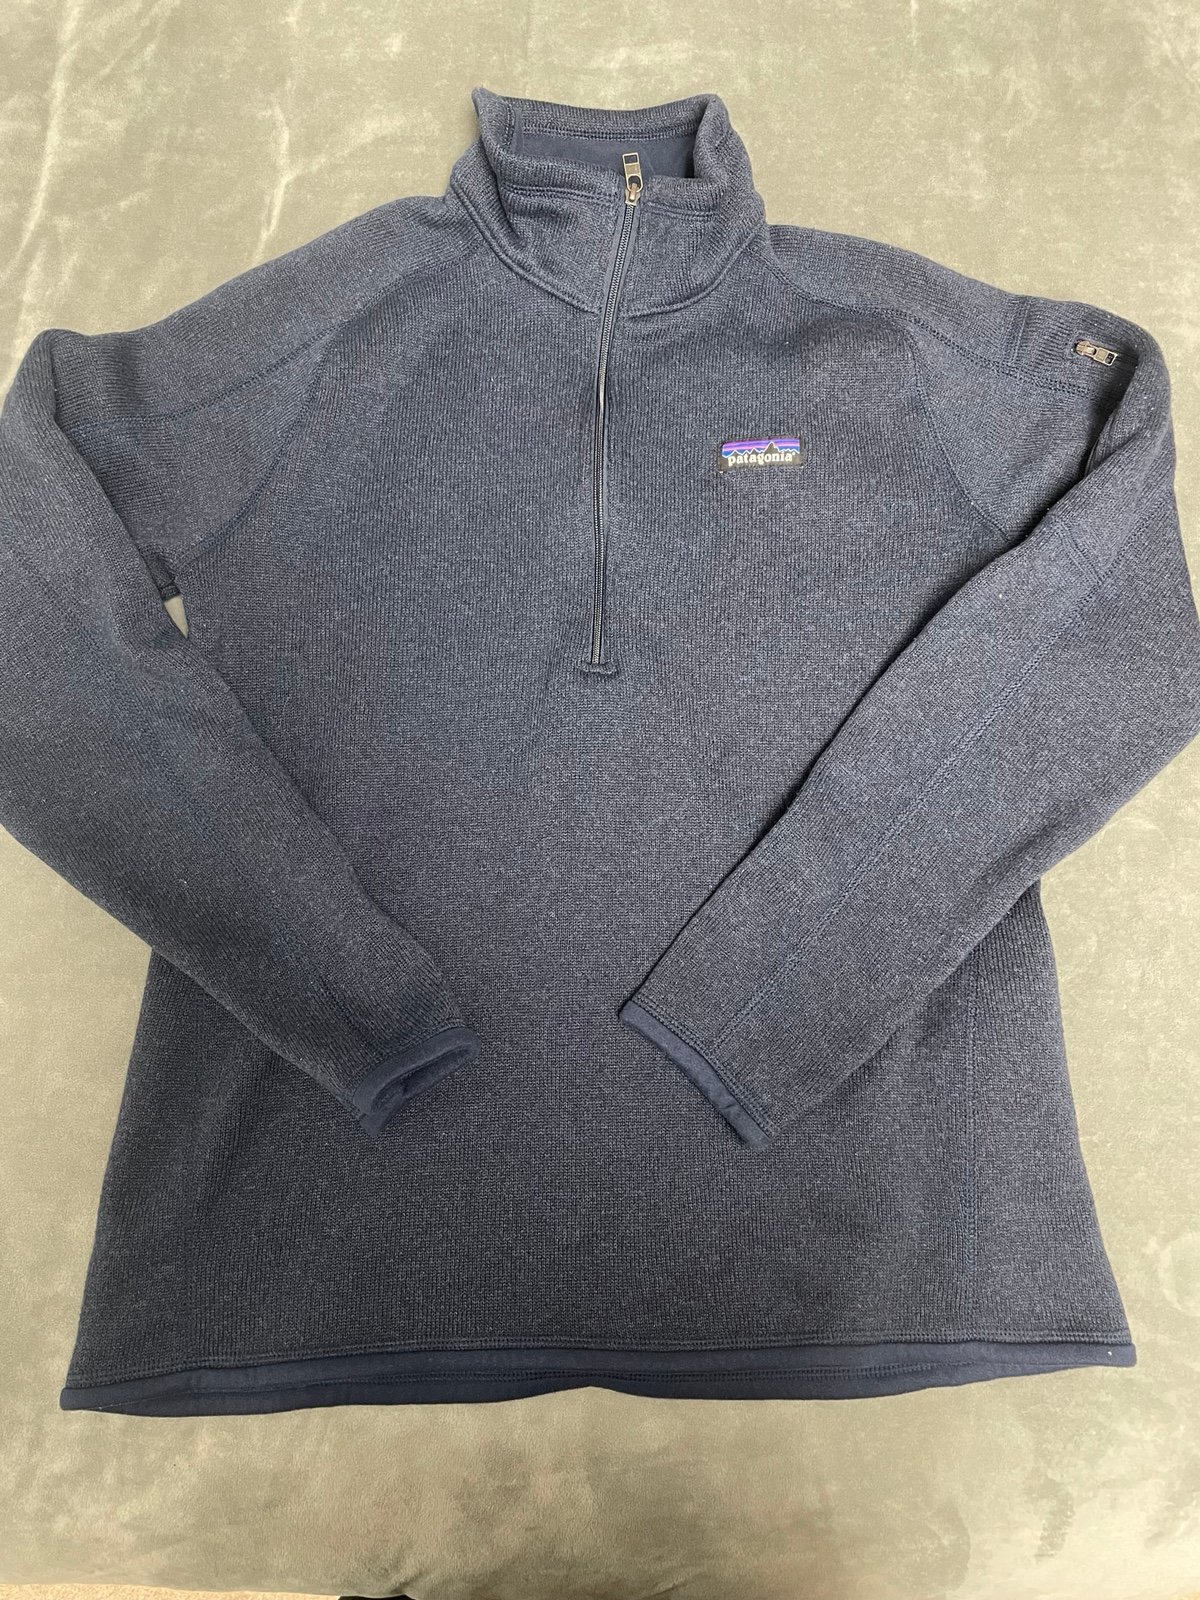 good price Patagonia better sweater pullover mrbQqszOE 